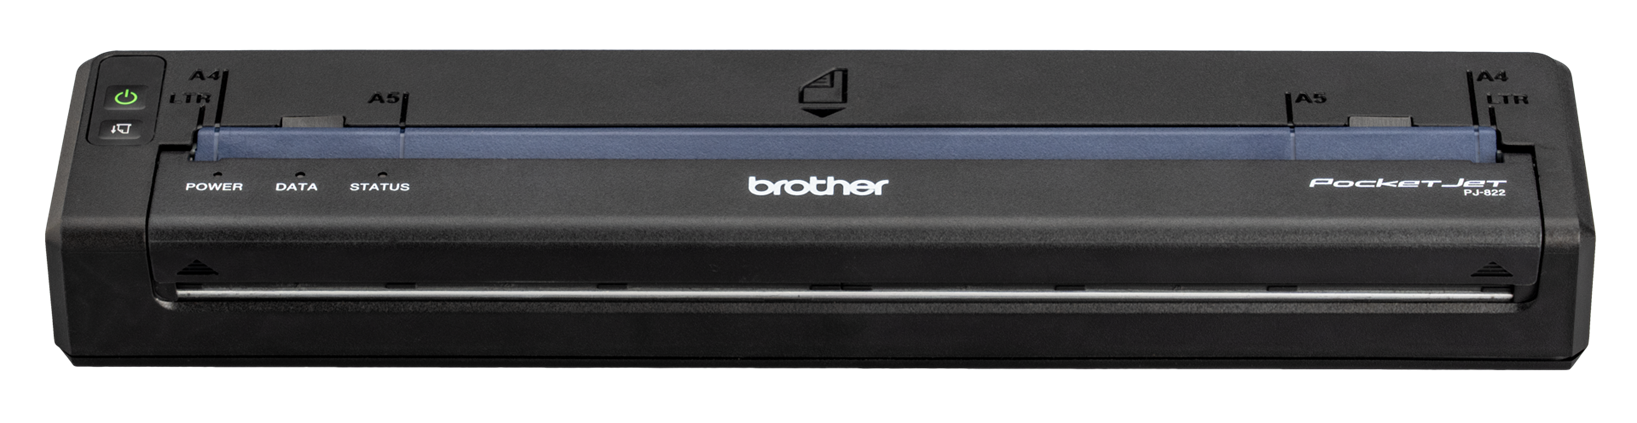 Brother PJ-822 imprimante A4 mobile Brother